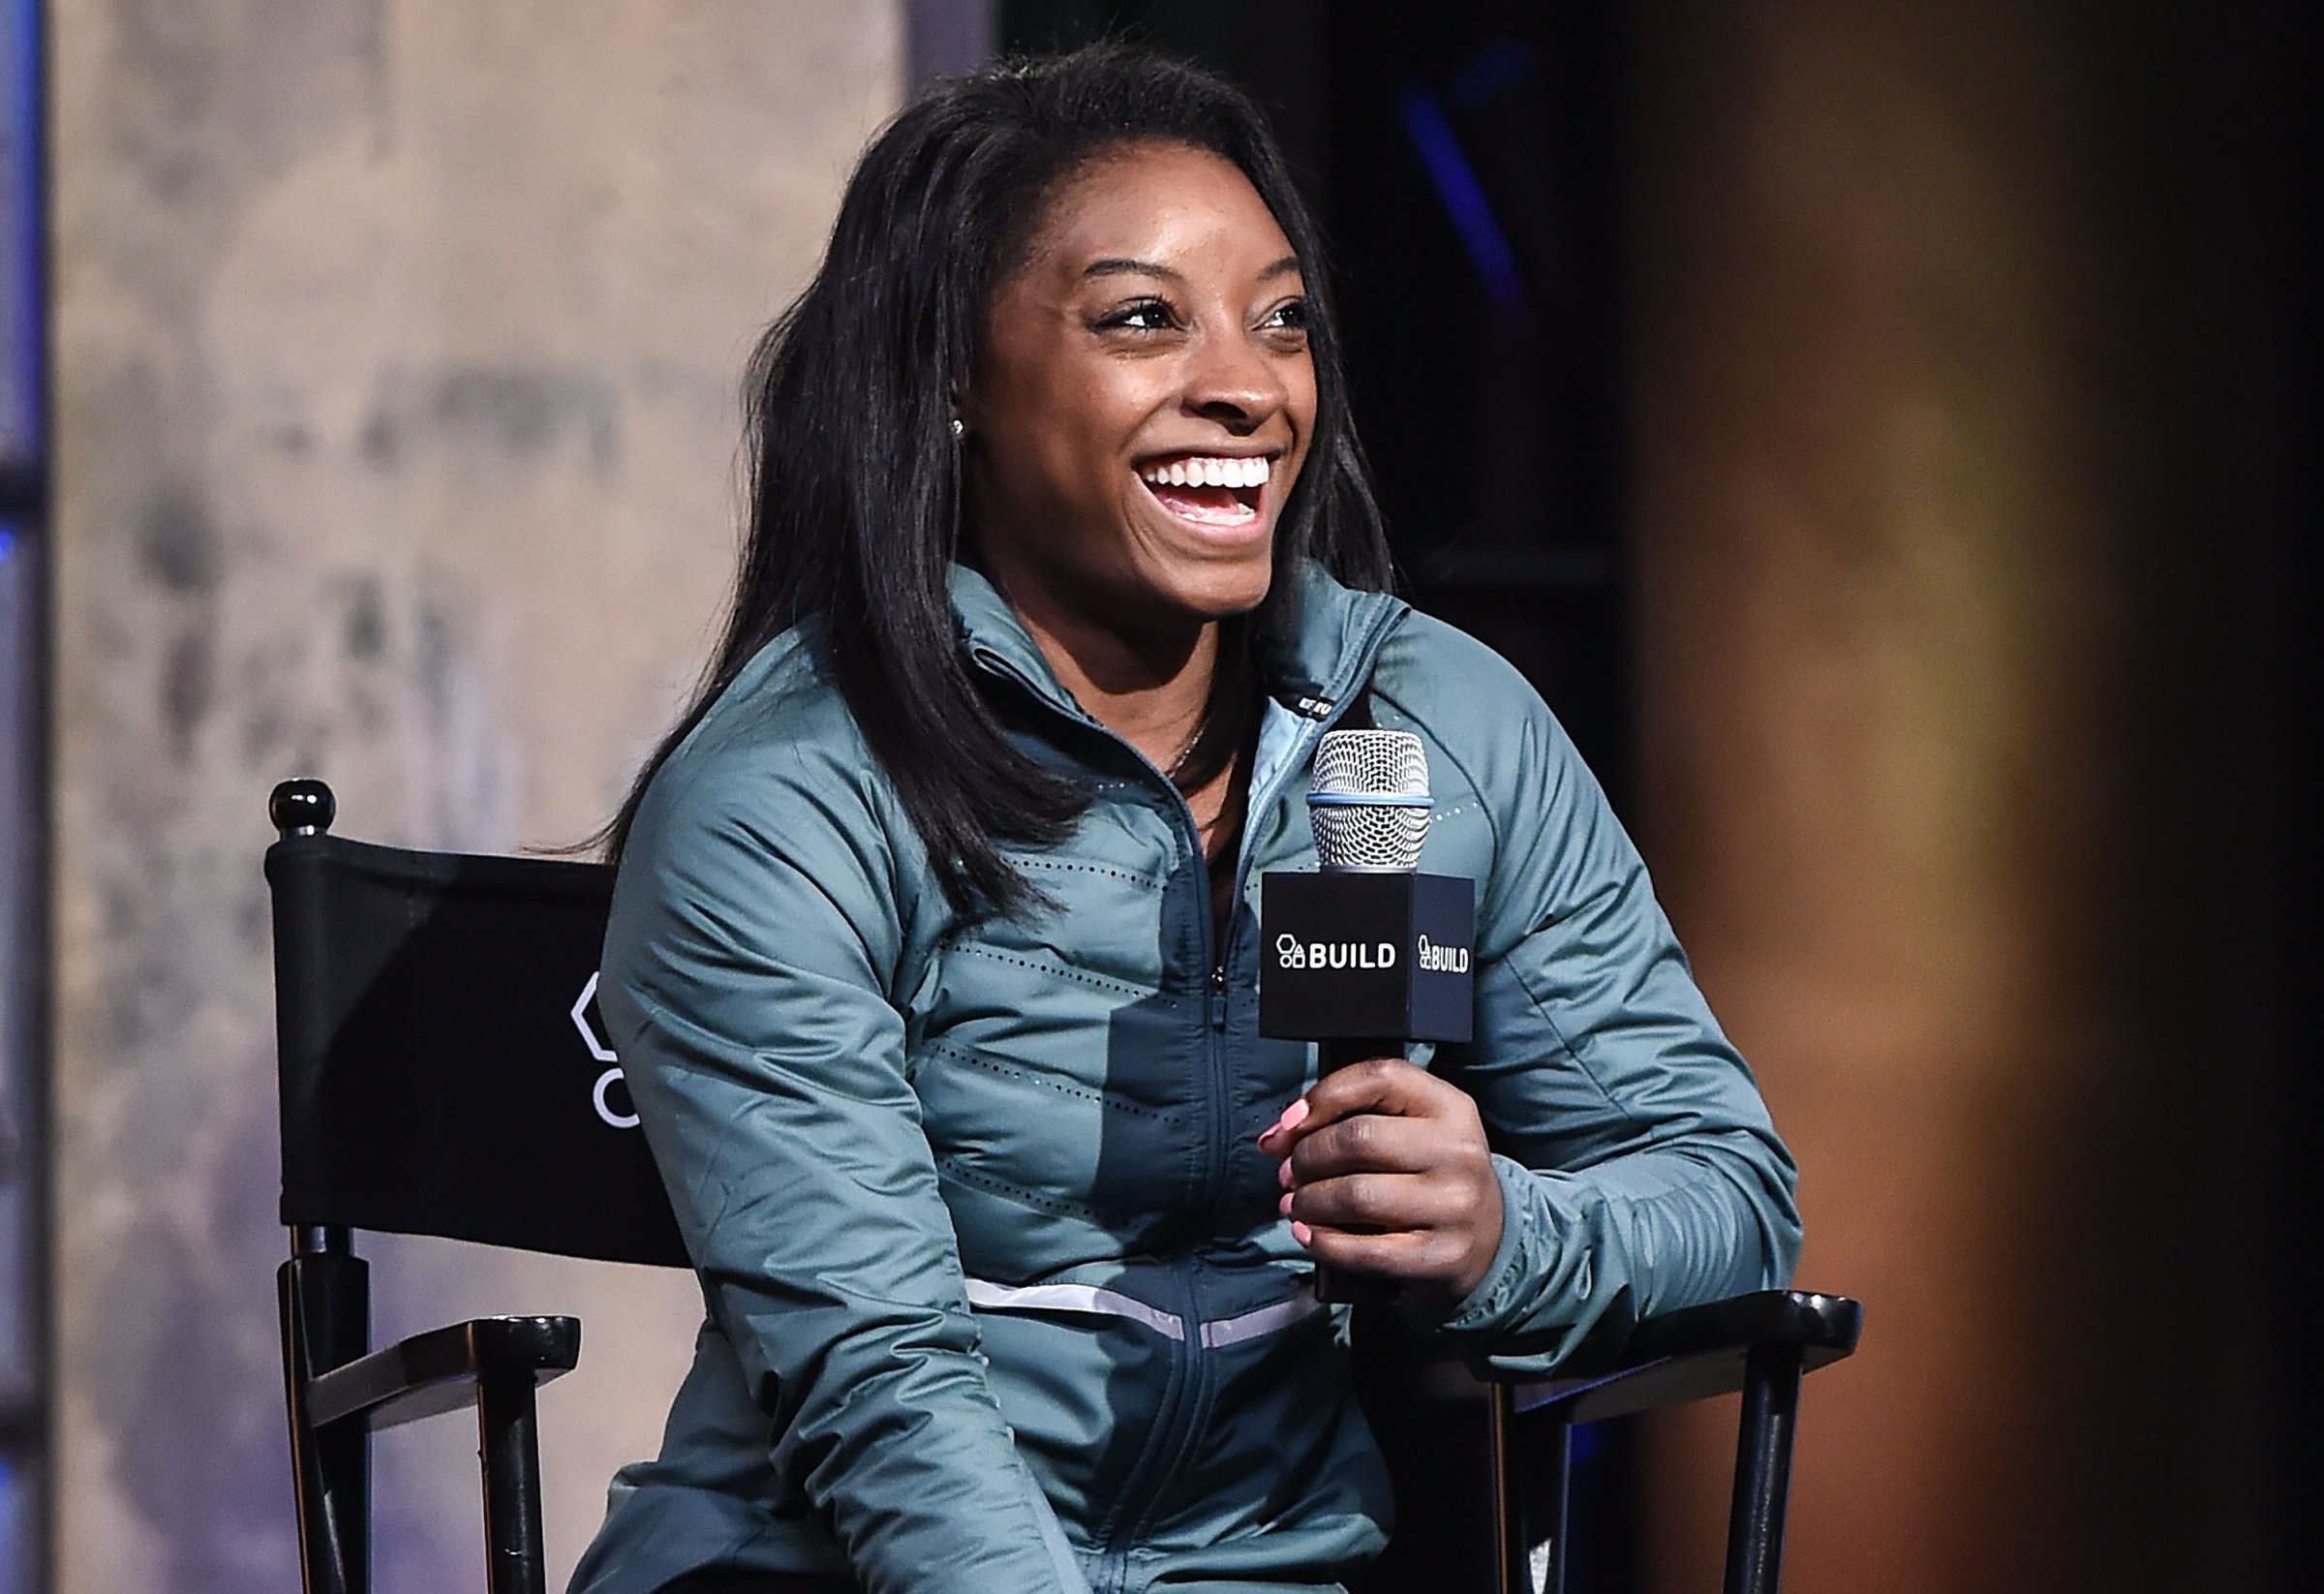 The Build Series Presents Simone Biles Discussing Her New Book "Courage To Soar"